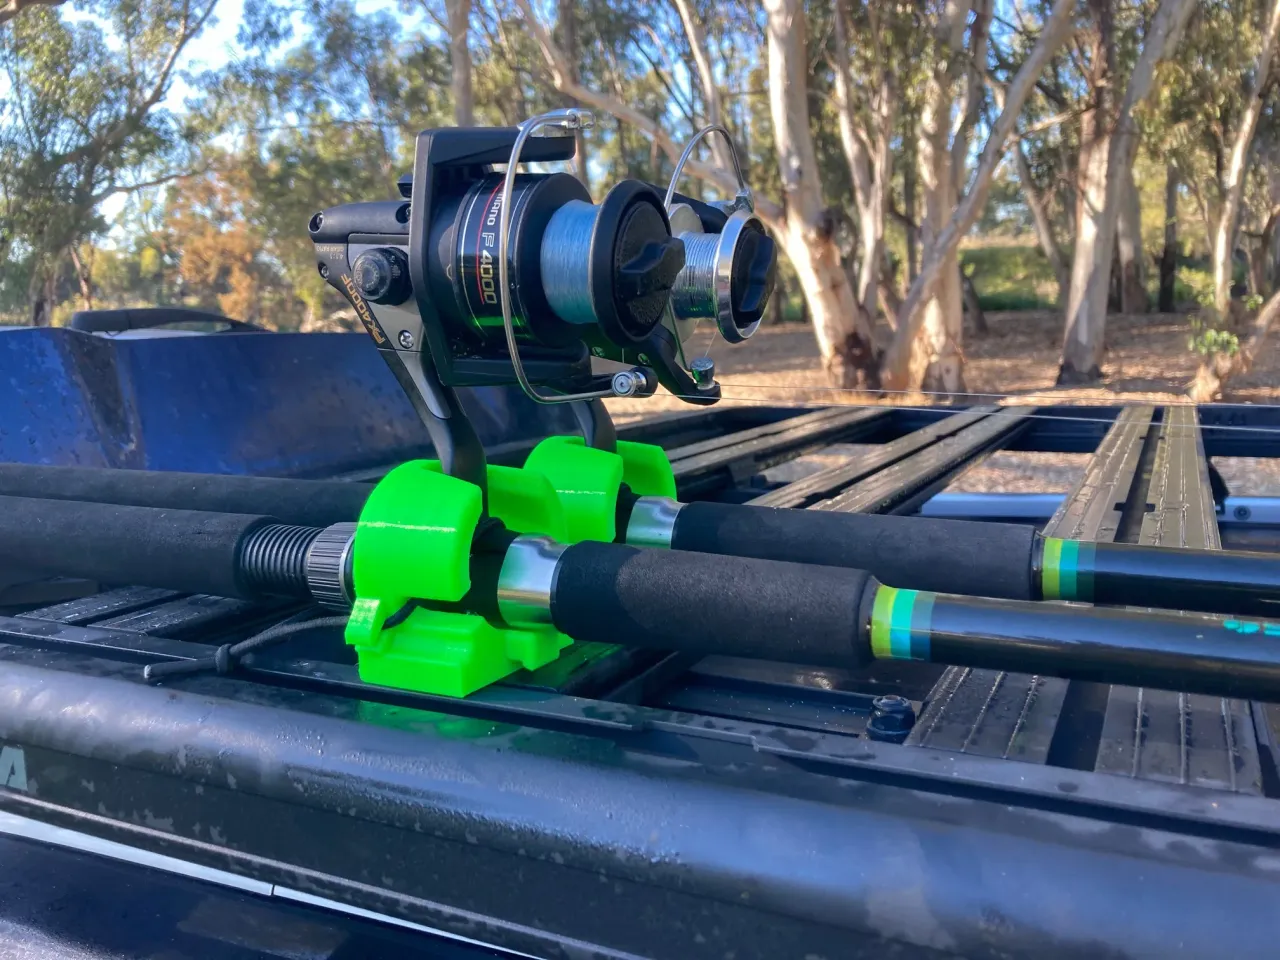 Roof Rack Fishing Rod Holder by GCarr